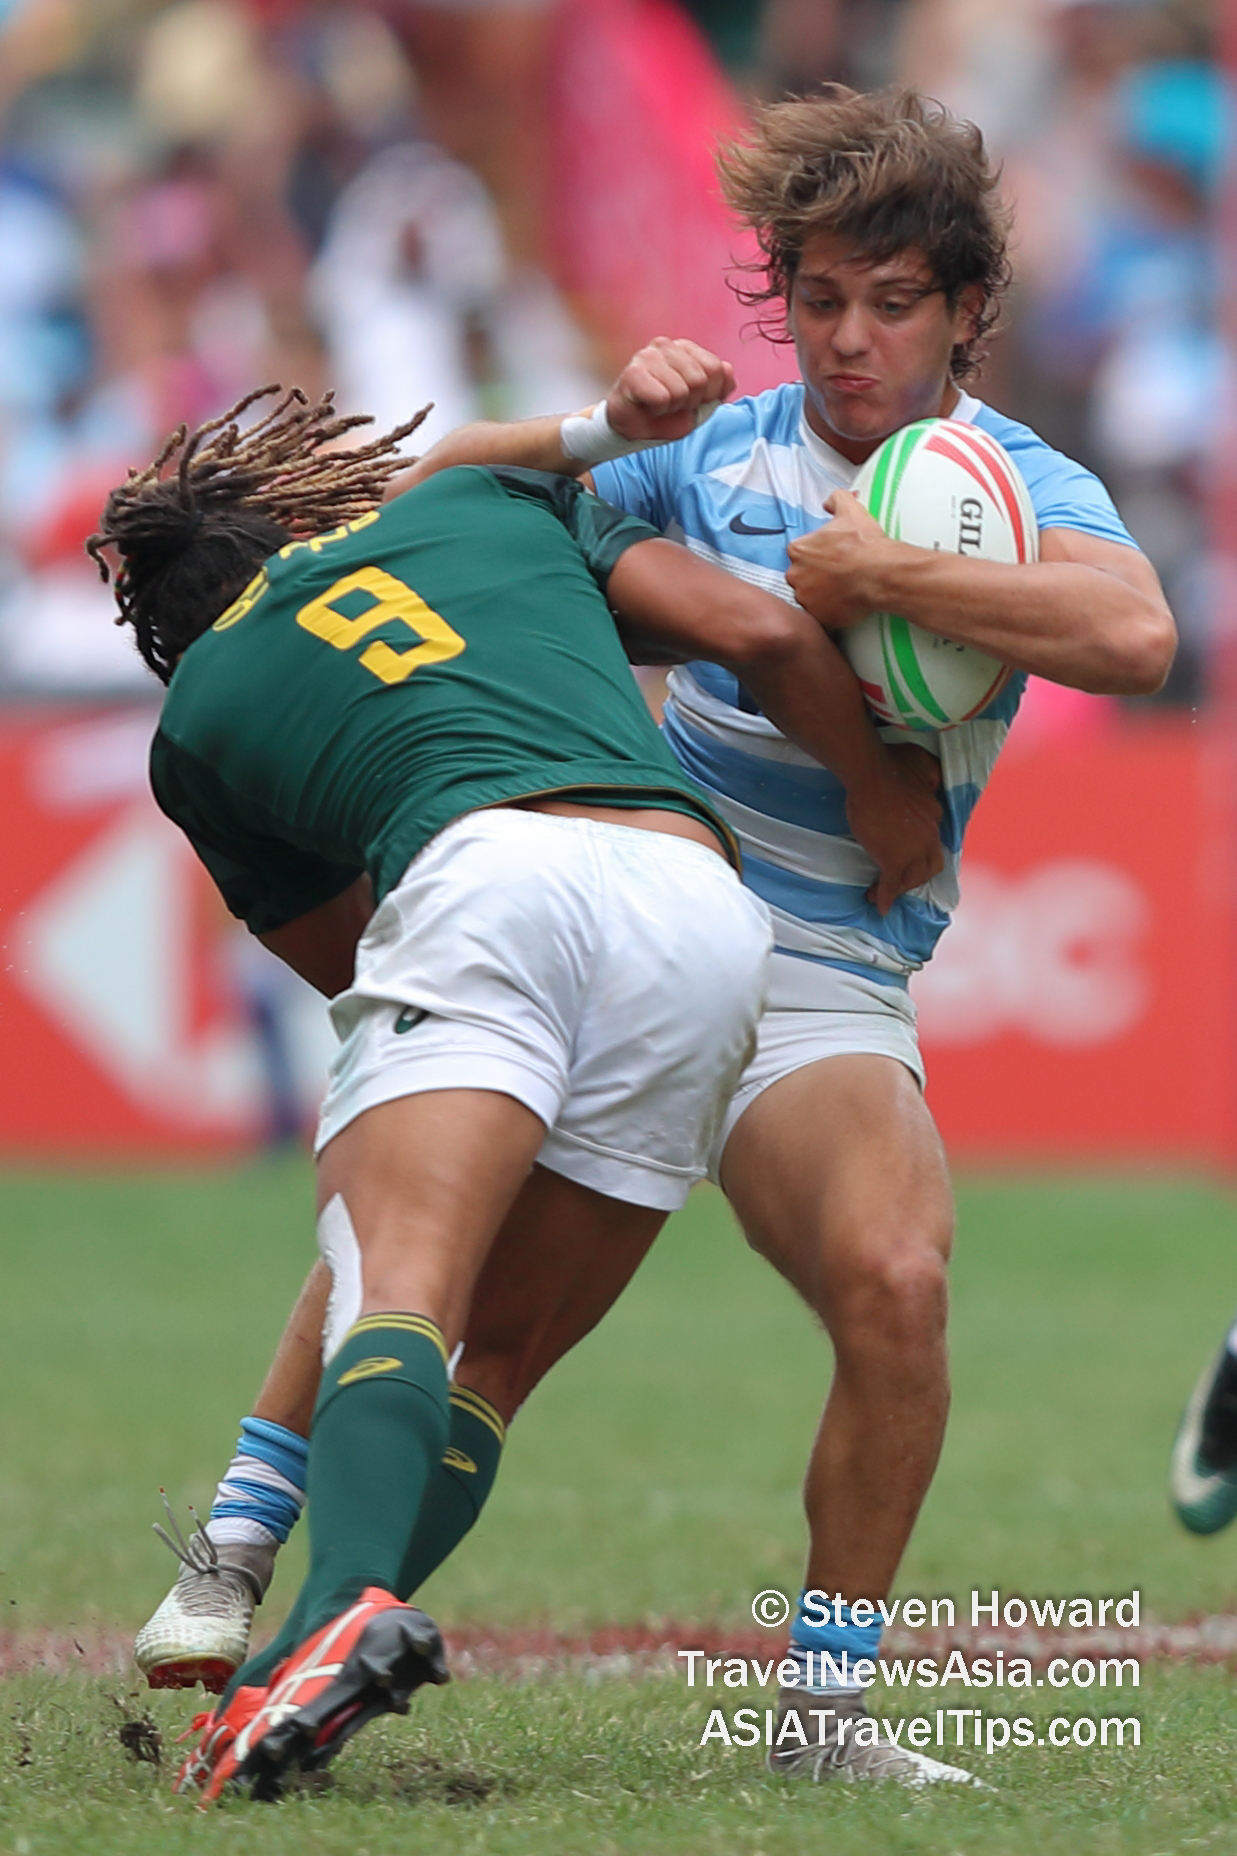 Action from South Africa vs Argentina at the 2019 Cathay Pacific / HSBC World Rugby Hong Kong Sevens. Picture by Steven Howard of TravelNewsAsia.com Click to enlarge.